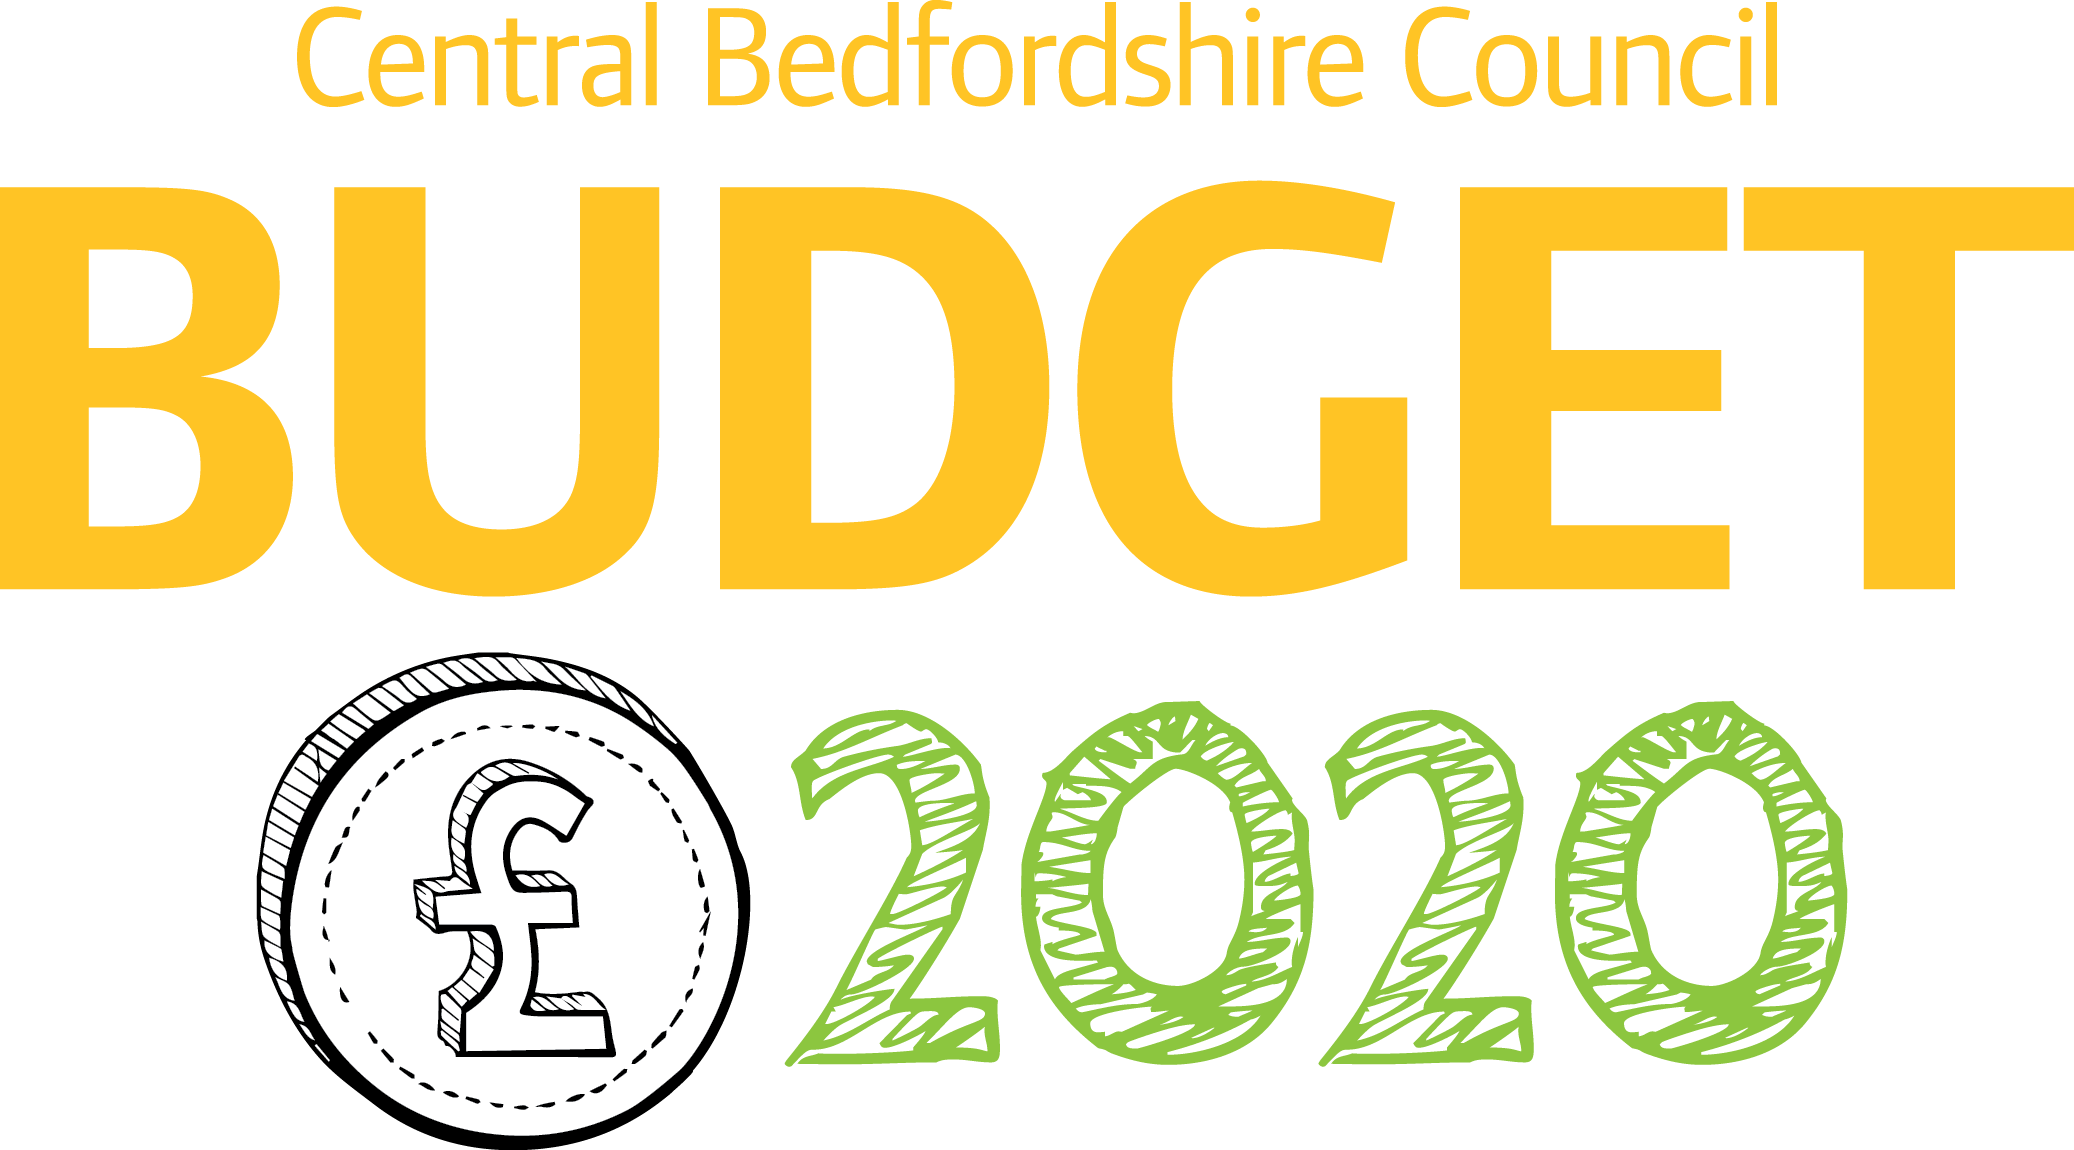 Have your say on council budget proposals for 2020